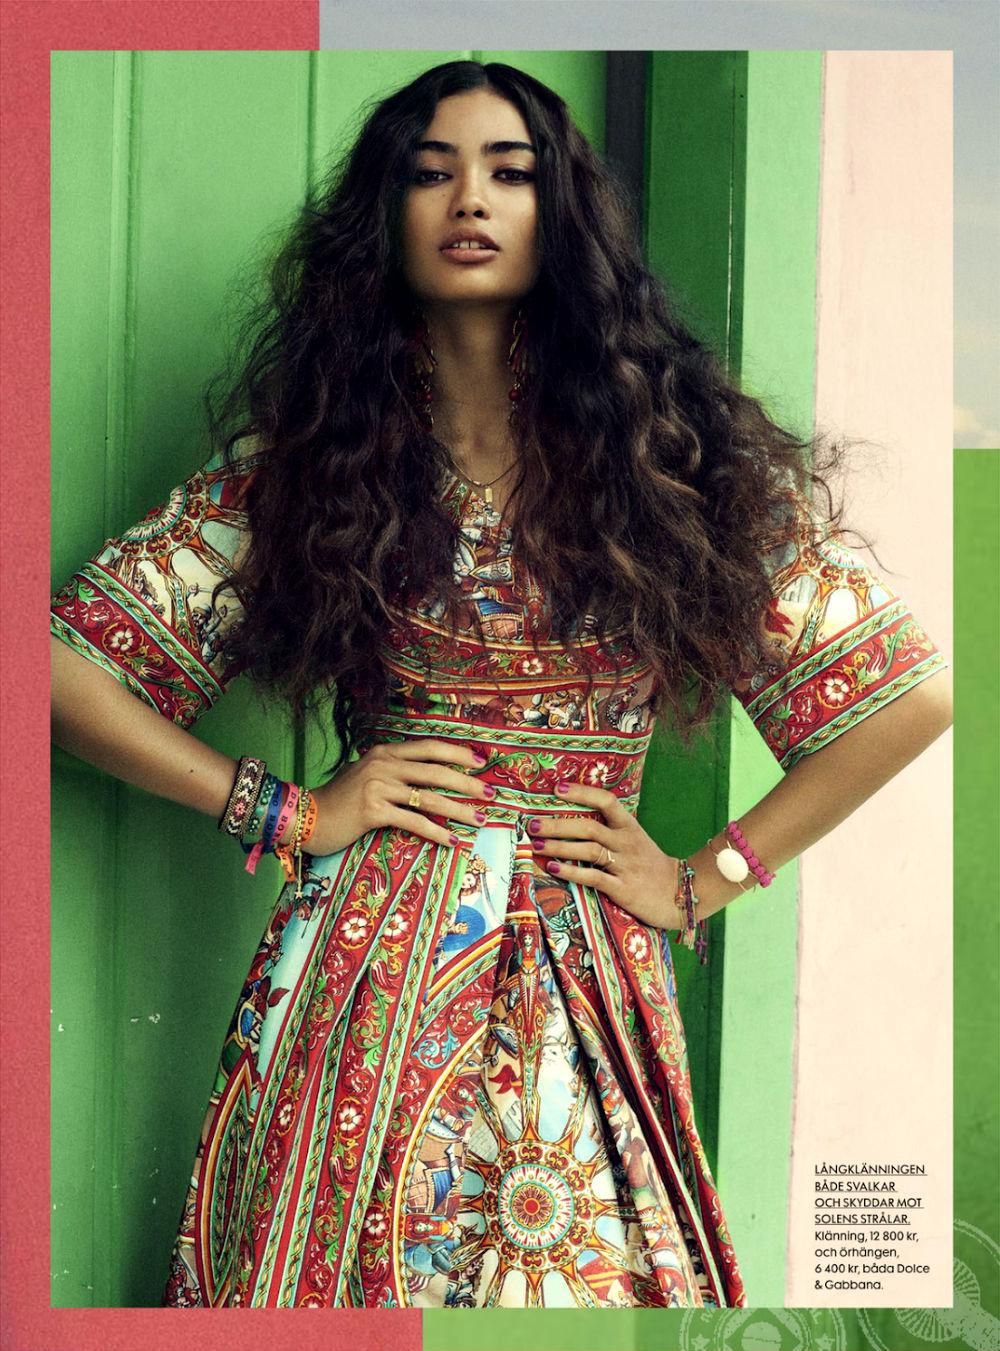 Kelly Gale by Jimmy Backius for Elle Sweden May 2013